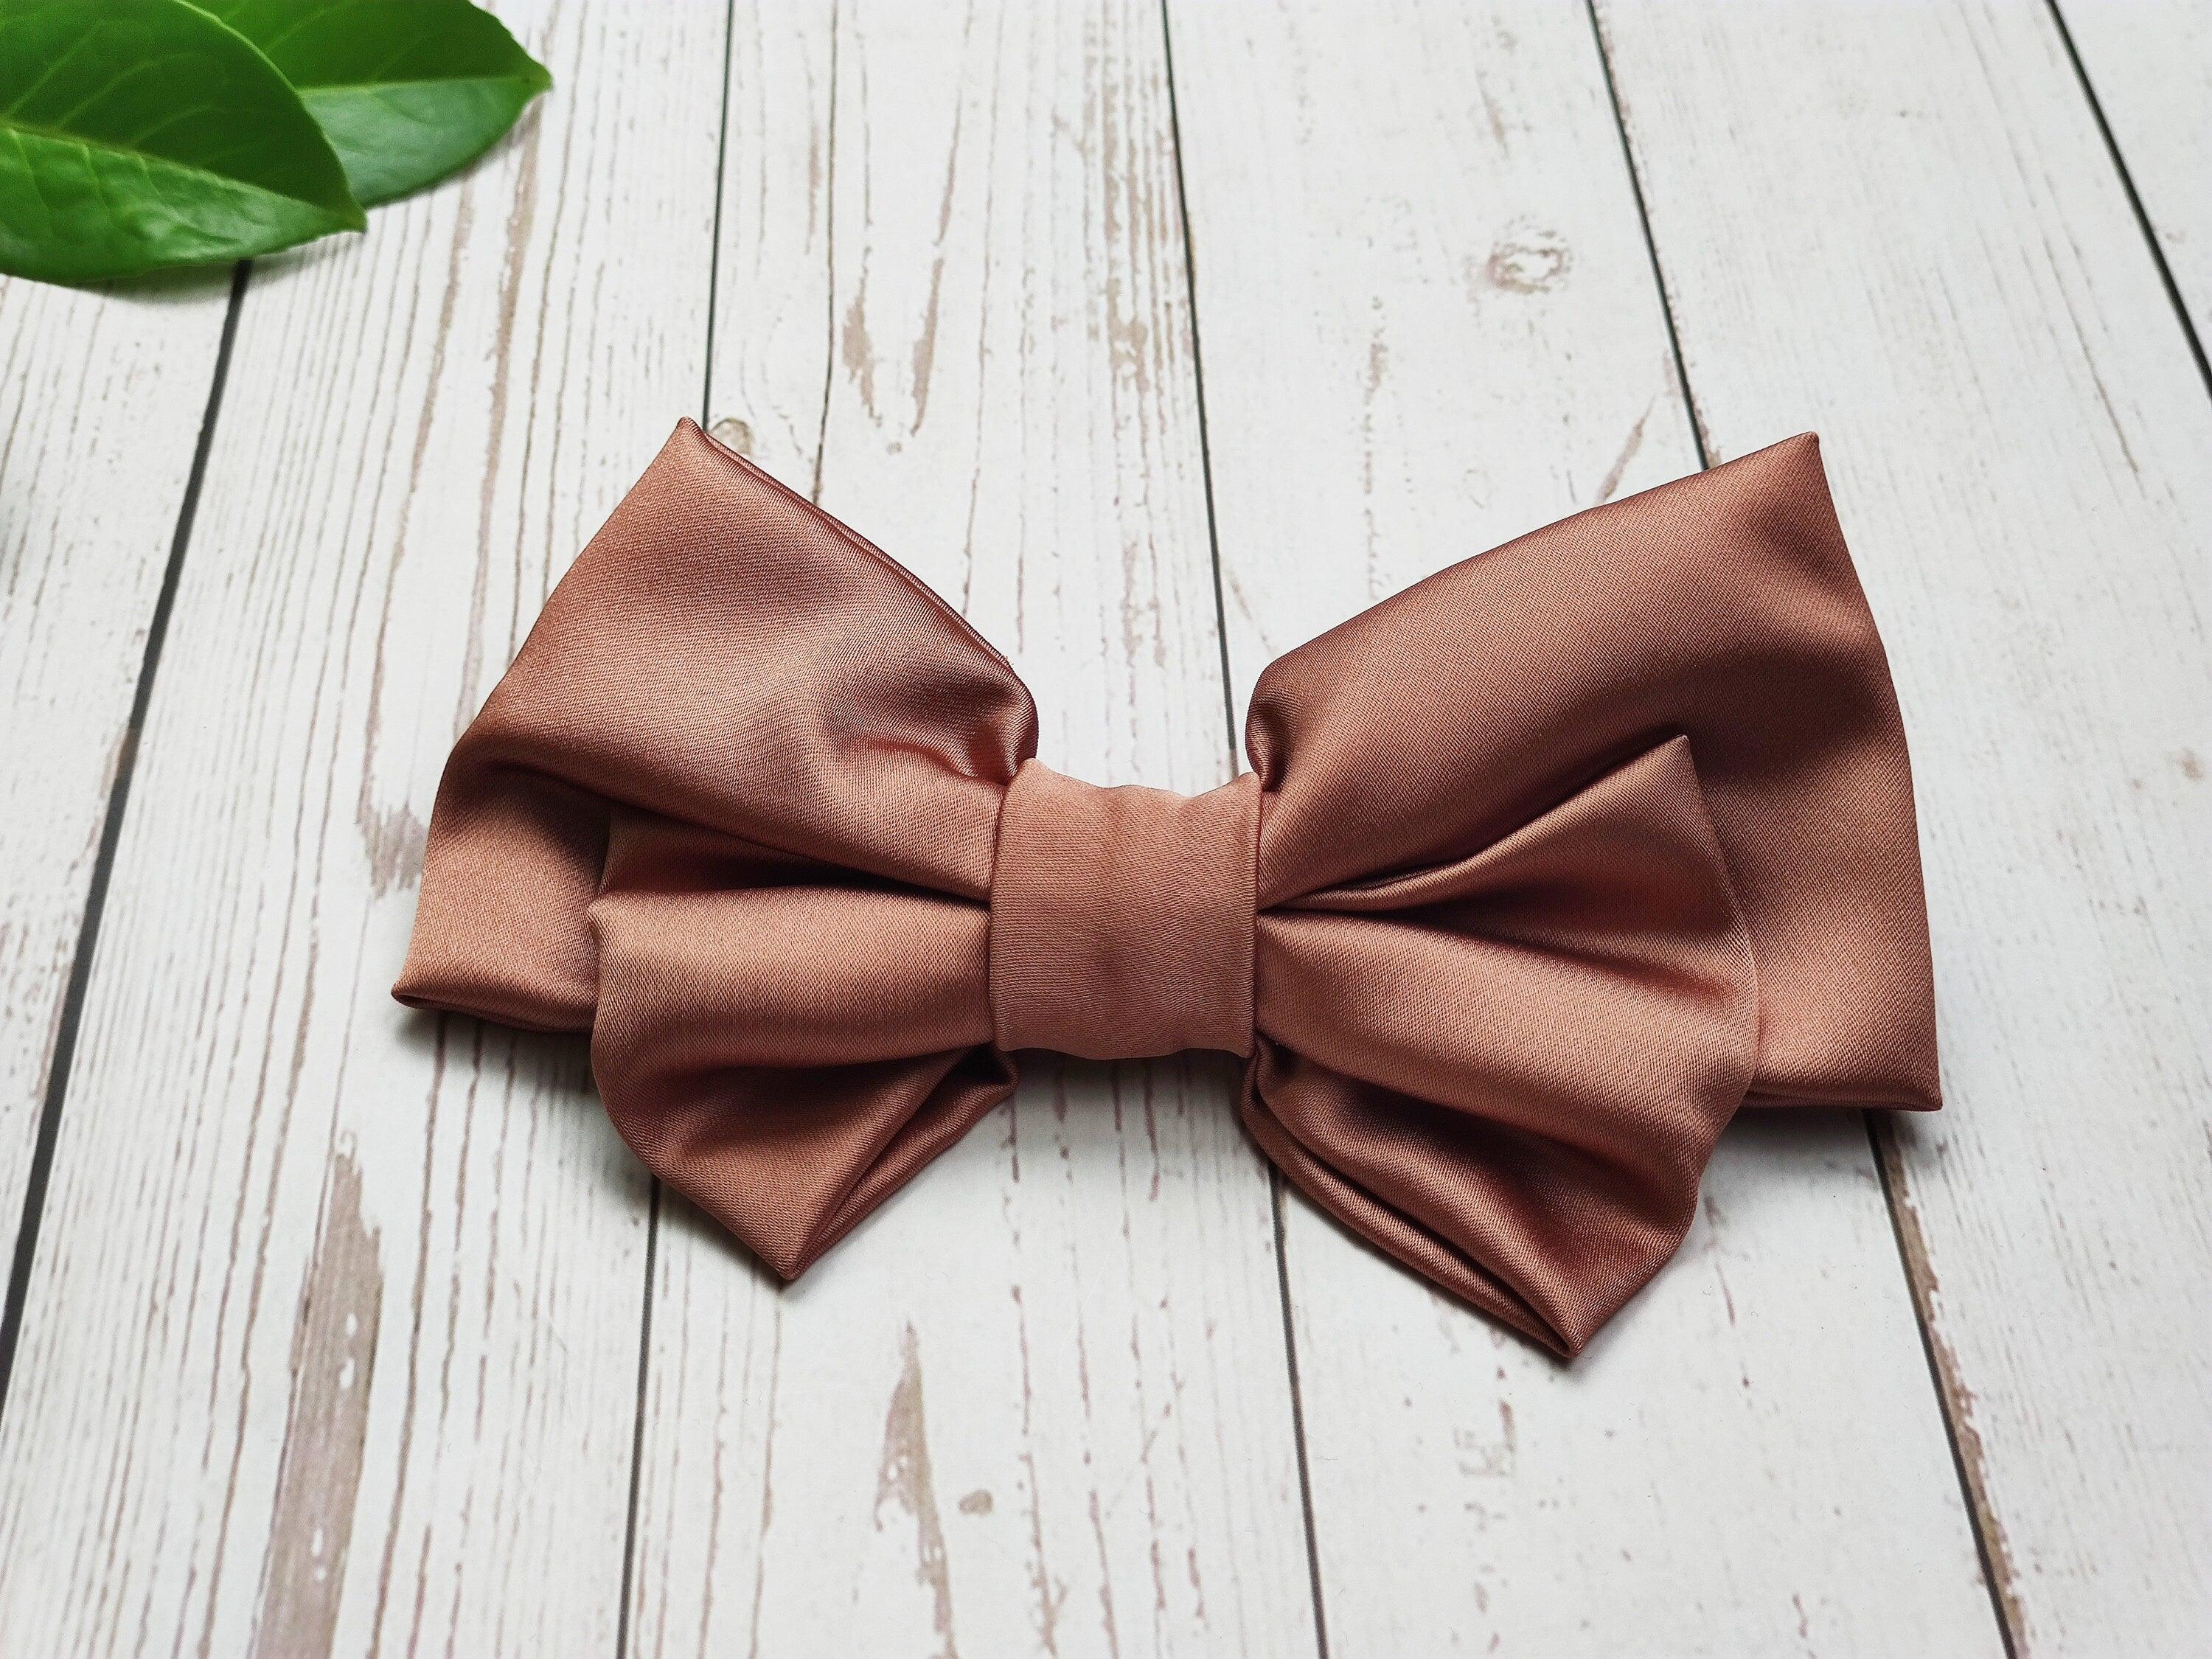 Elegant Handmade Satin Hair Clips with Bow - Brick Color Hairpins, Fashionable Hair Accessory and Bow Clasp available at Moyoni Design